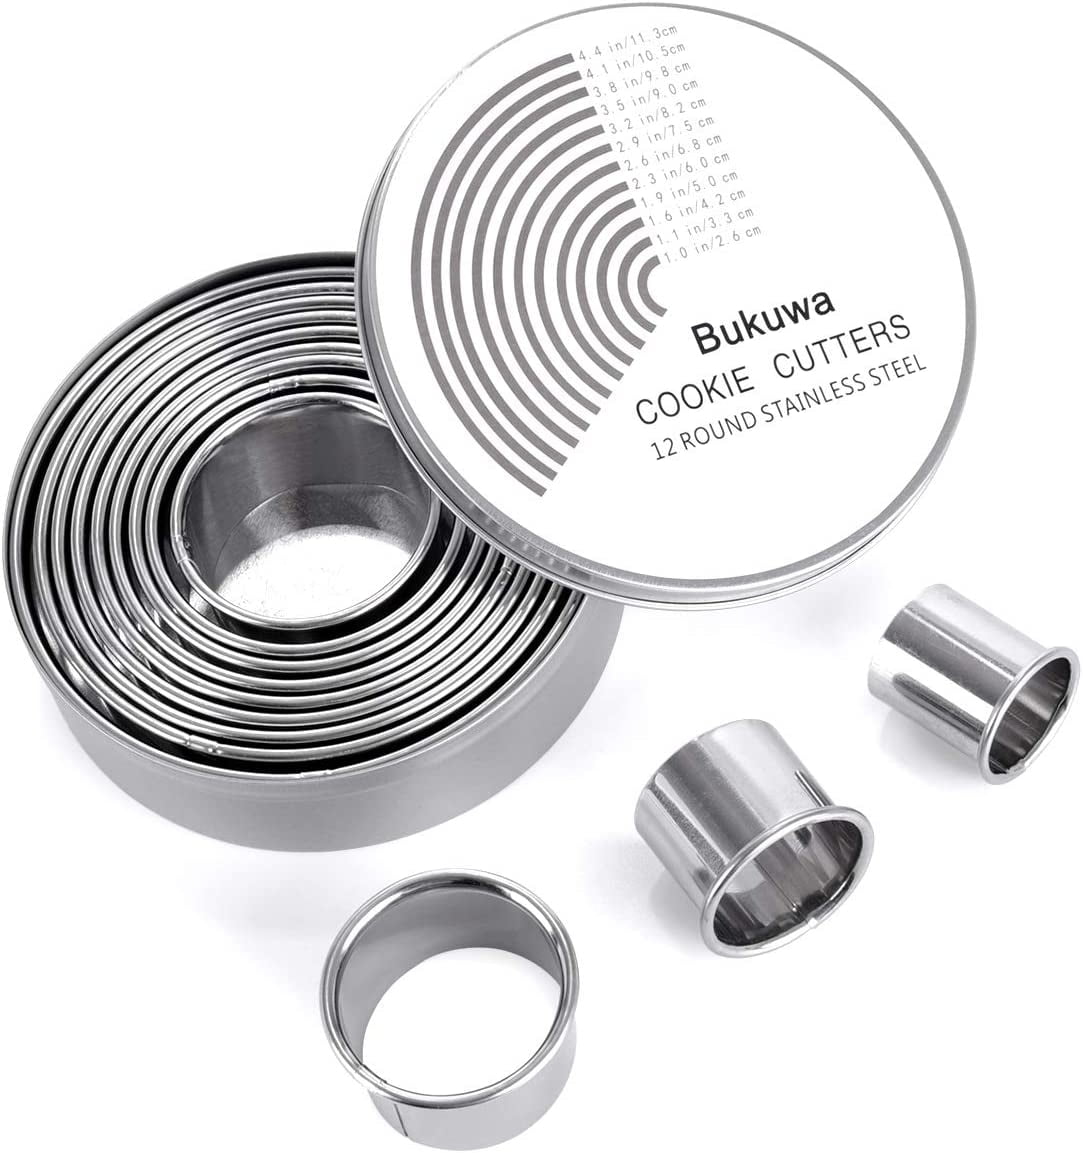 Biscuit Cookie Cutter Set, Biscuit Round Cutters Metal Ring Baking